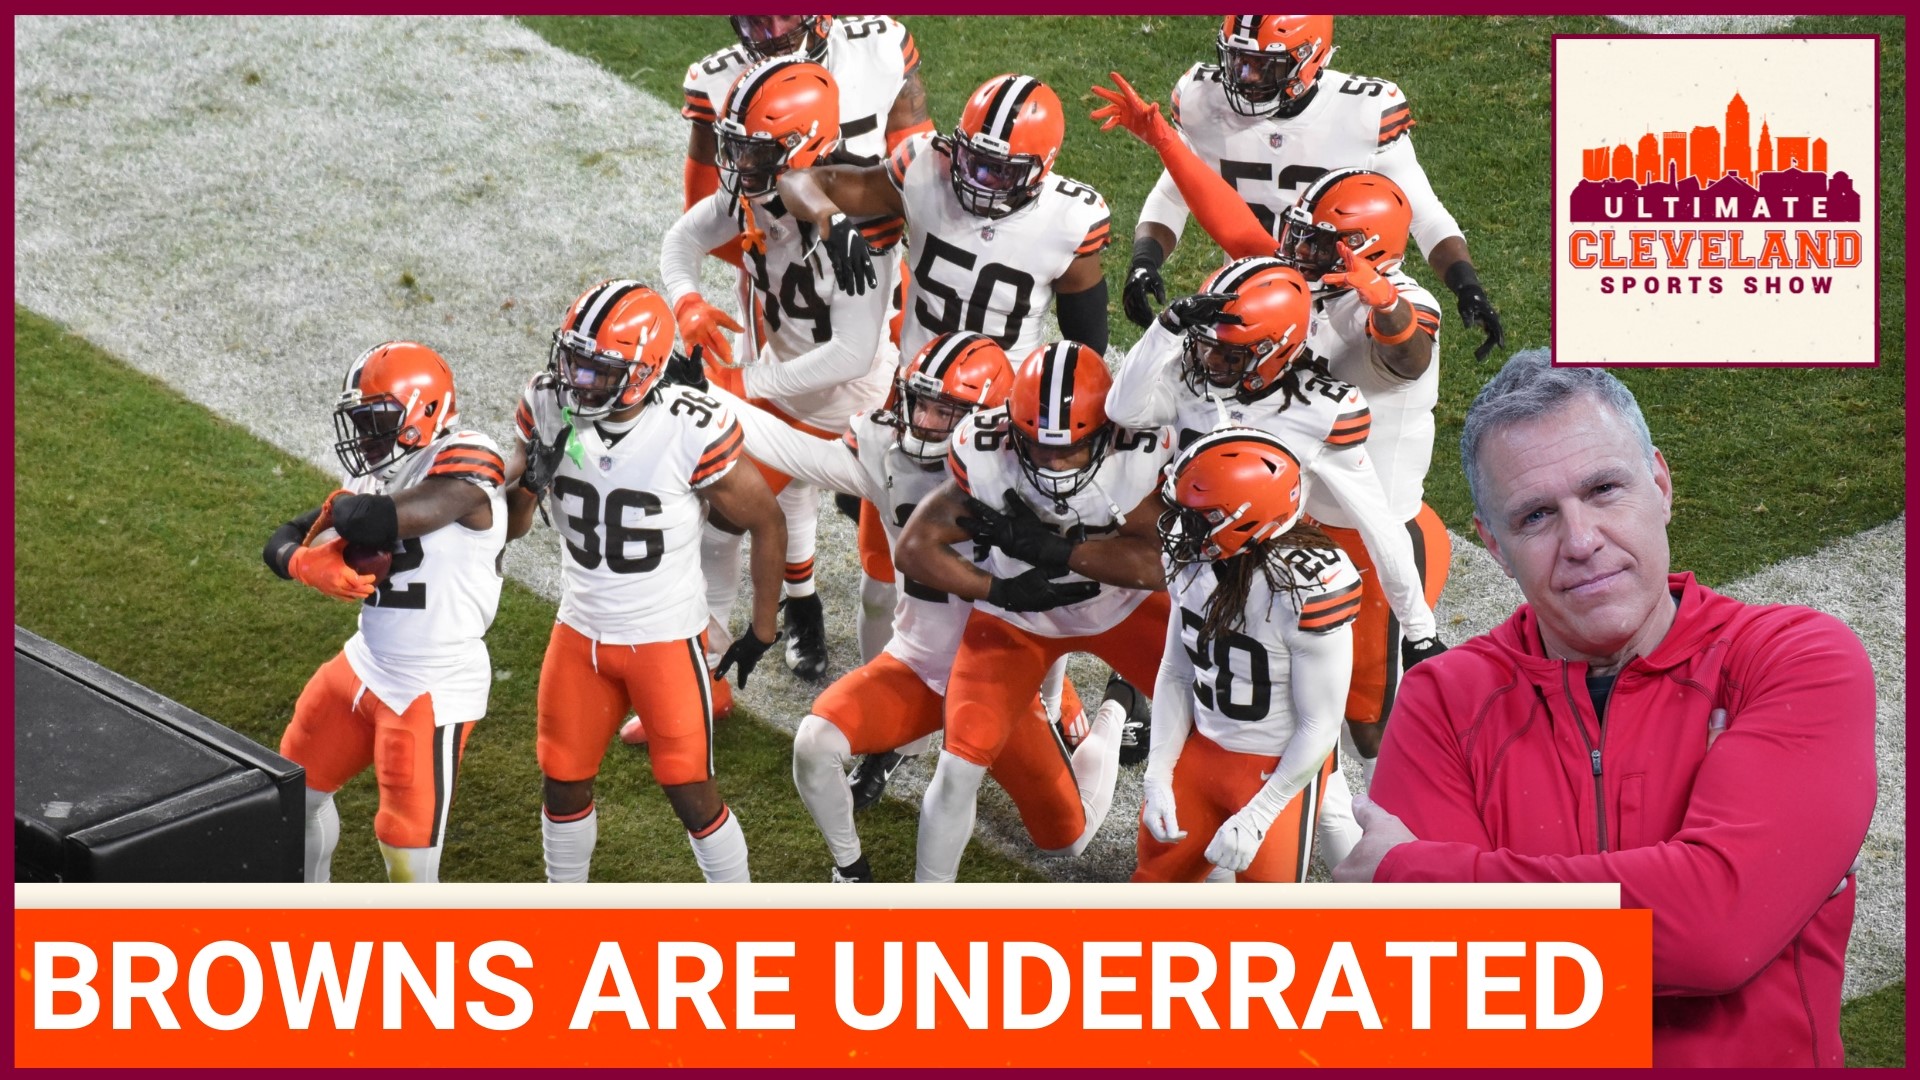 Cleveland Browns Ranked 10th in the NFL???, Did ESPN Totally Screw This  Up?